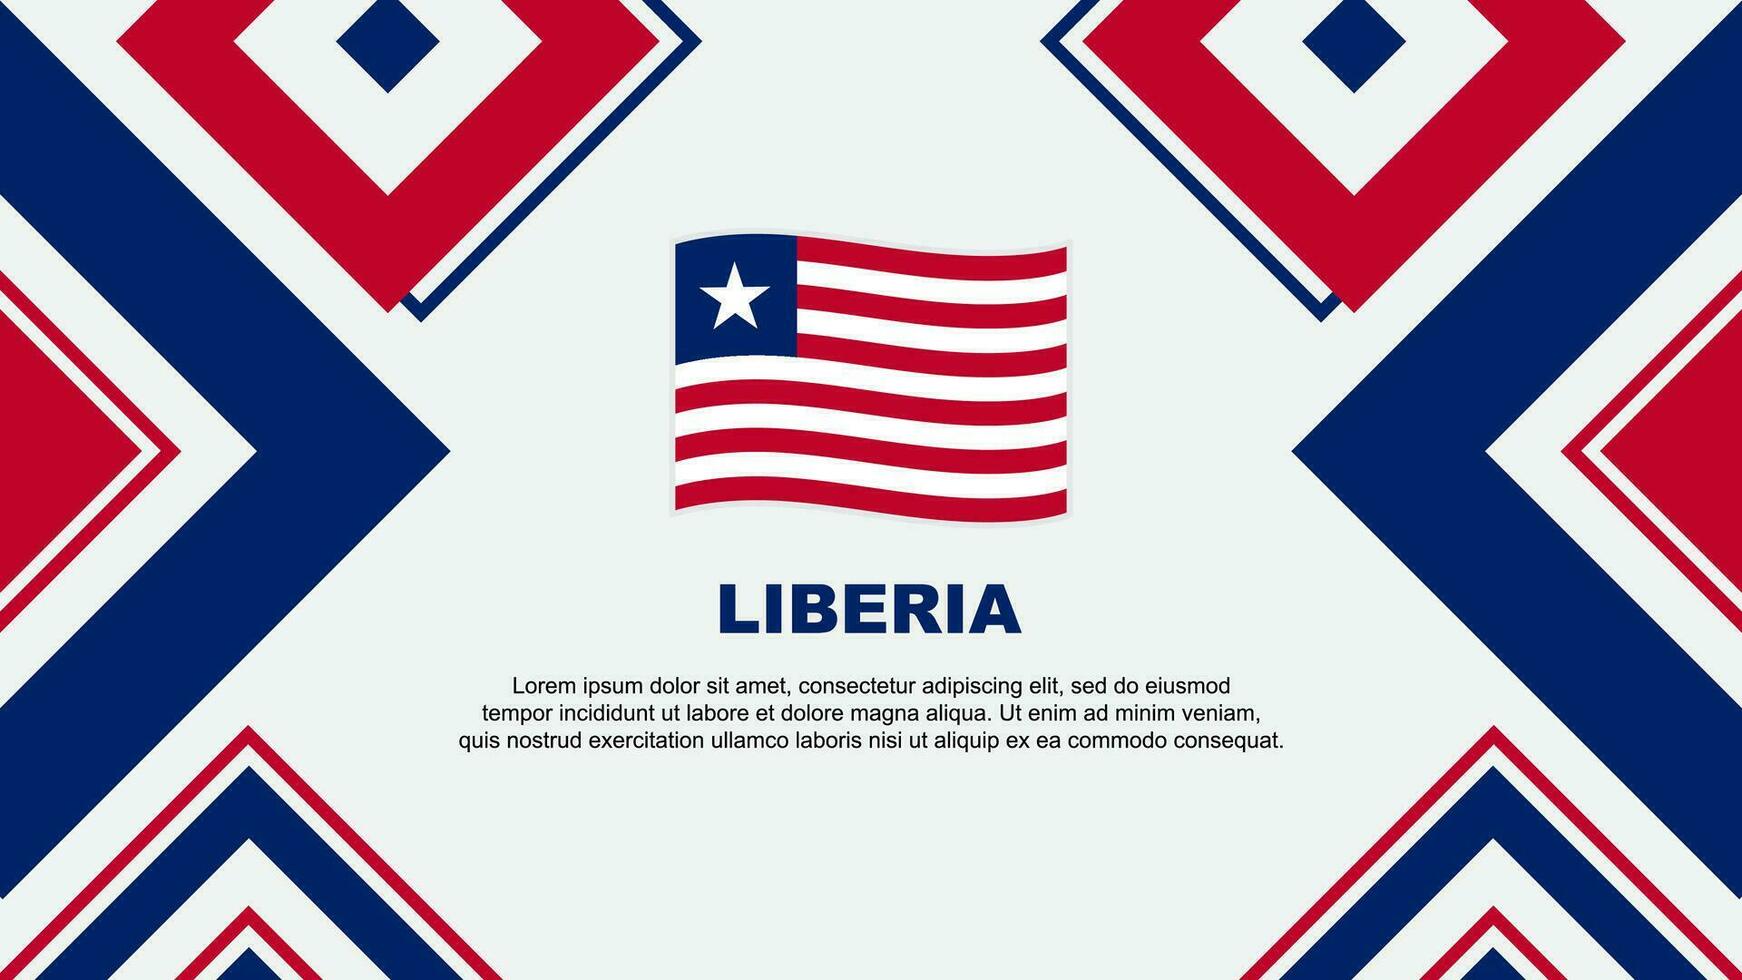 Liberia Flag Abstract Background Design Template. Liberia Independence Day Banner Wallpaper Vector Illustration. Liberia Independence Day